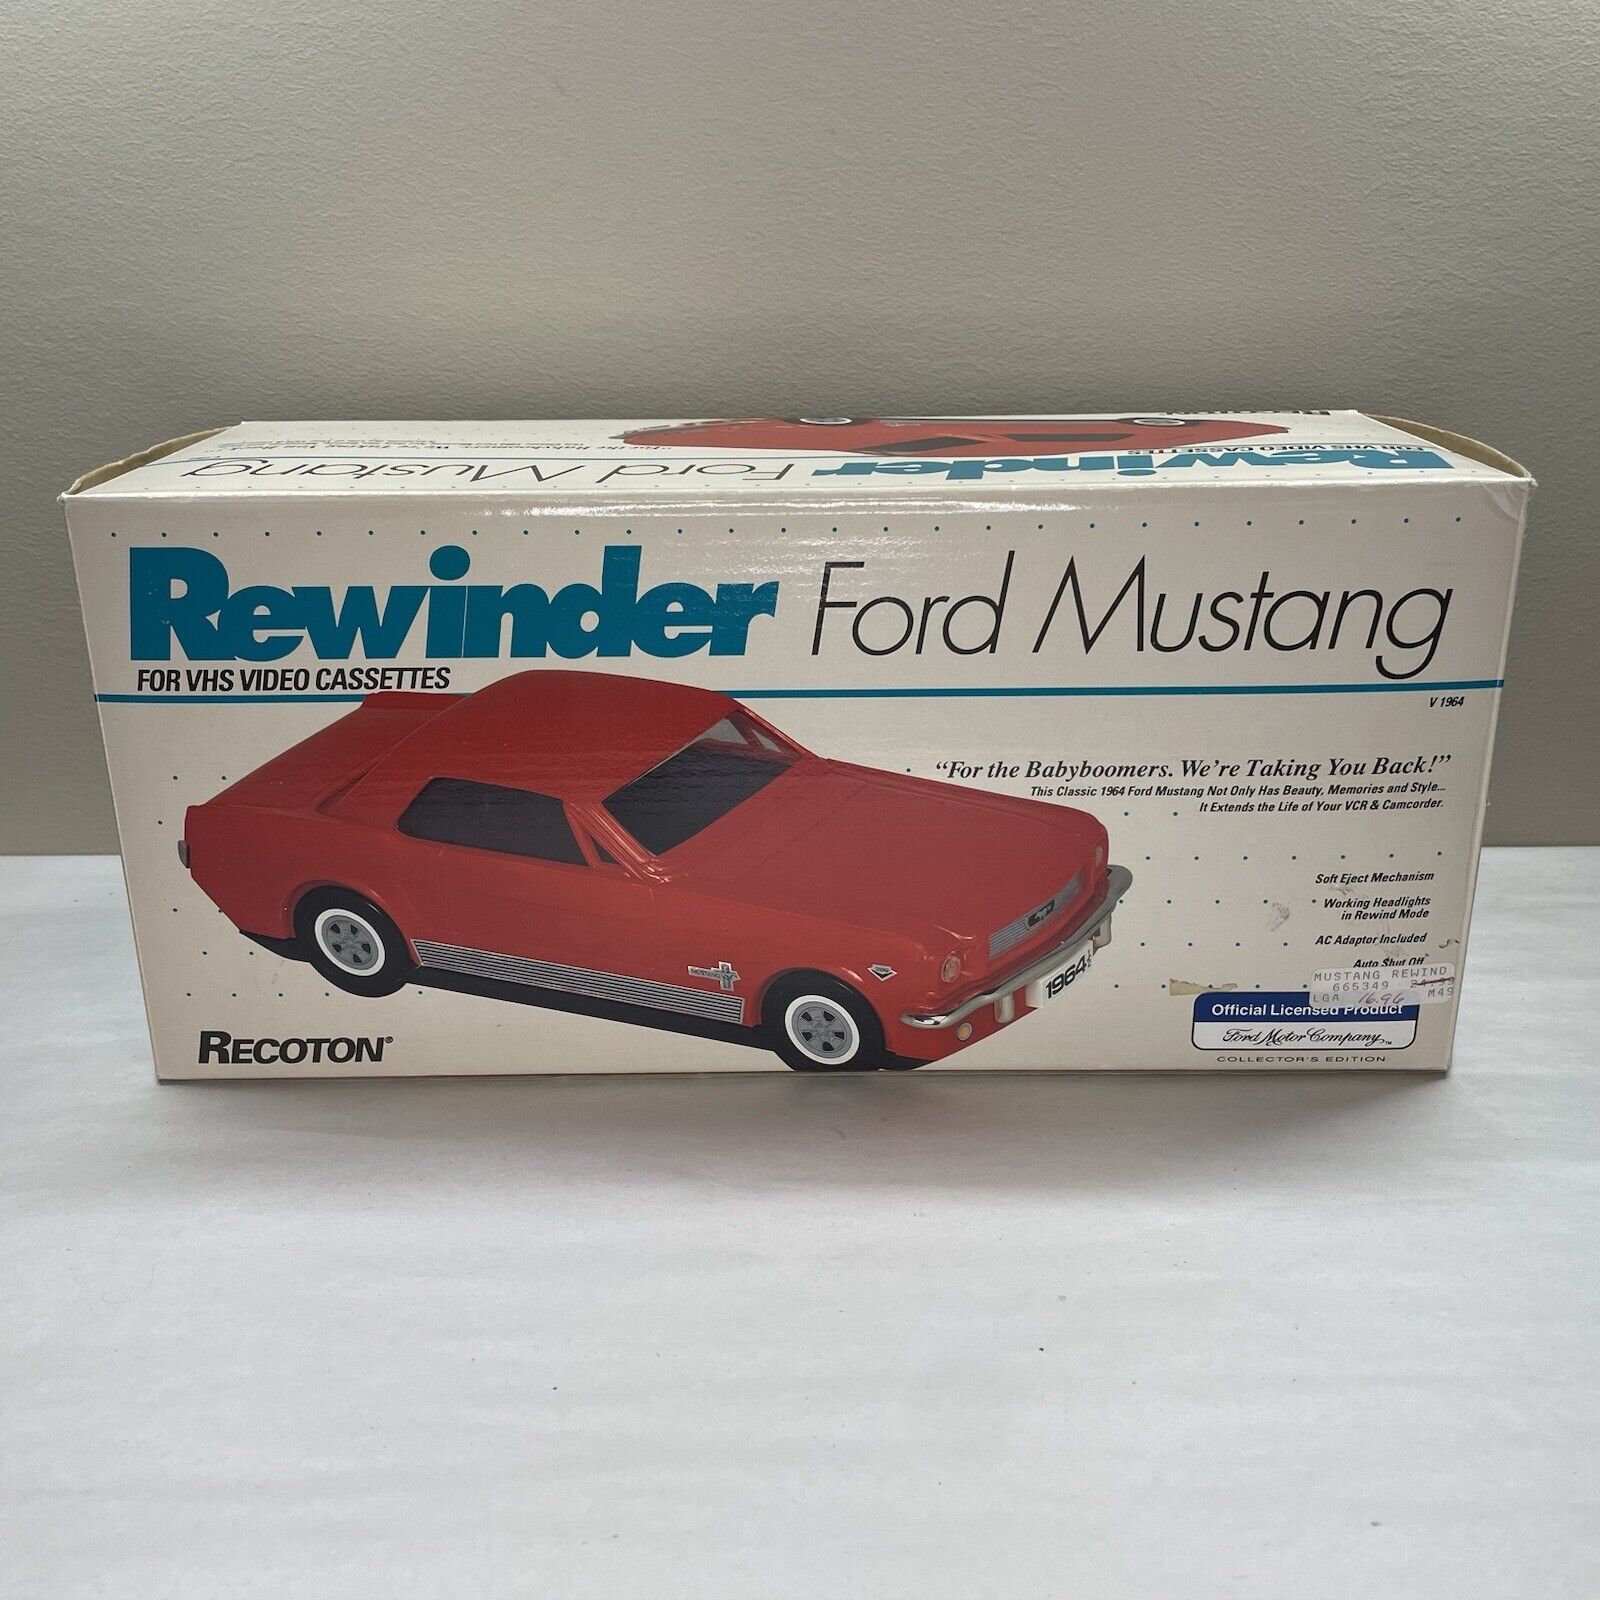 VINTAGE 1964 1/2 FORD MUSTANG VHS Tape REWINDER - COLLECTOR\'S EDITION BY RECOTON